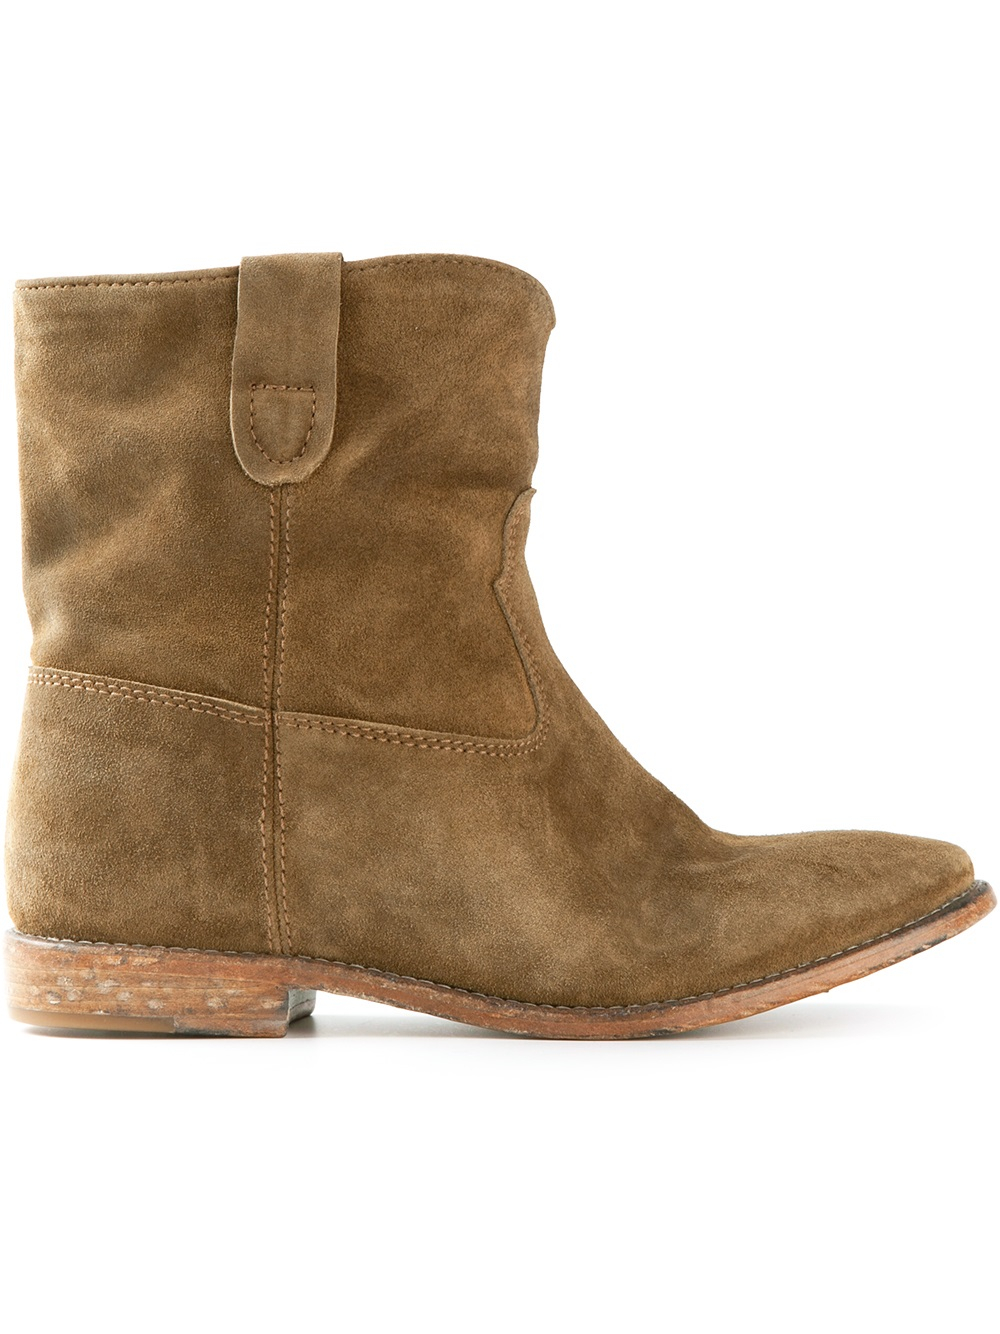 Isabel marant Crisi Boot in Brown | Lyst